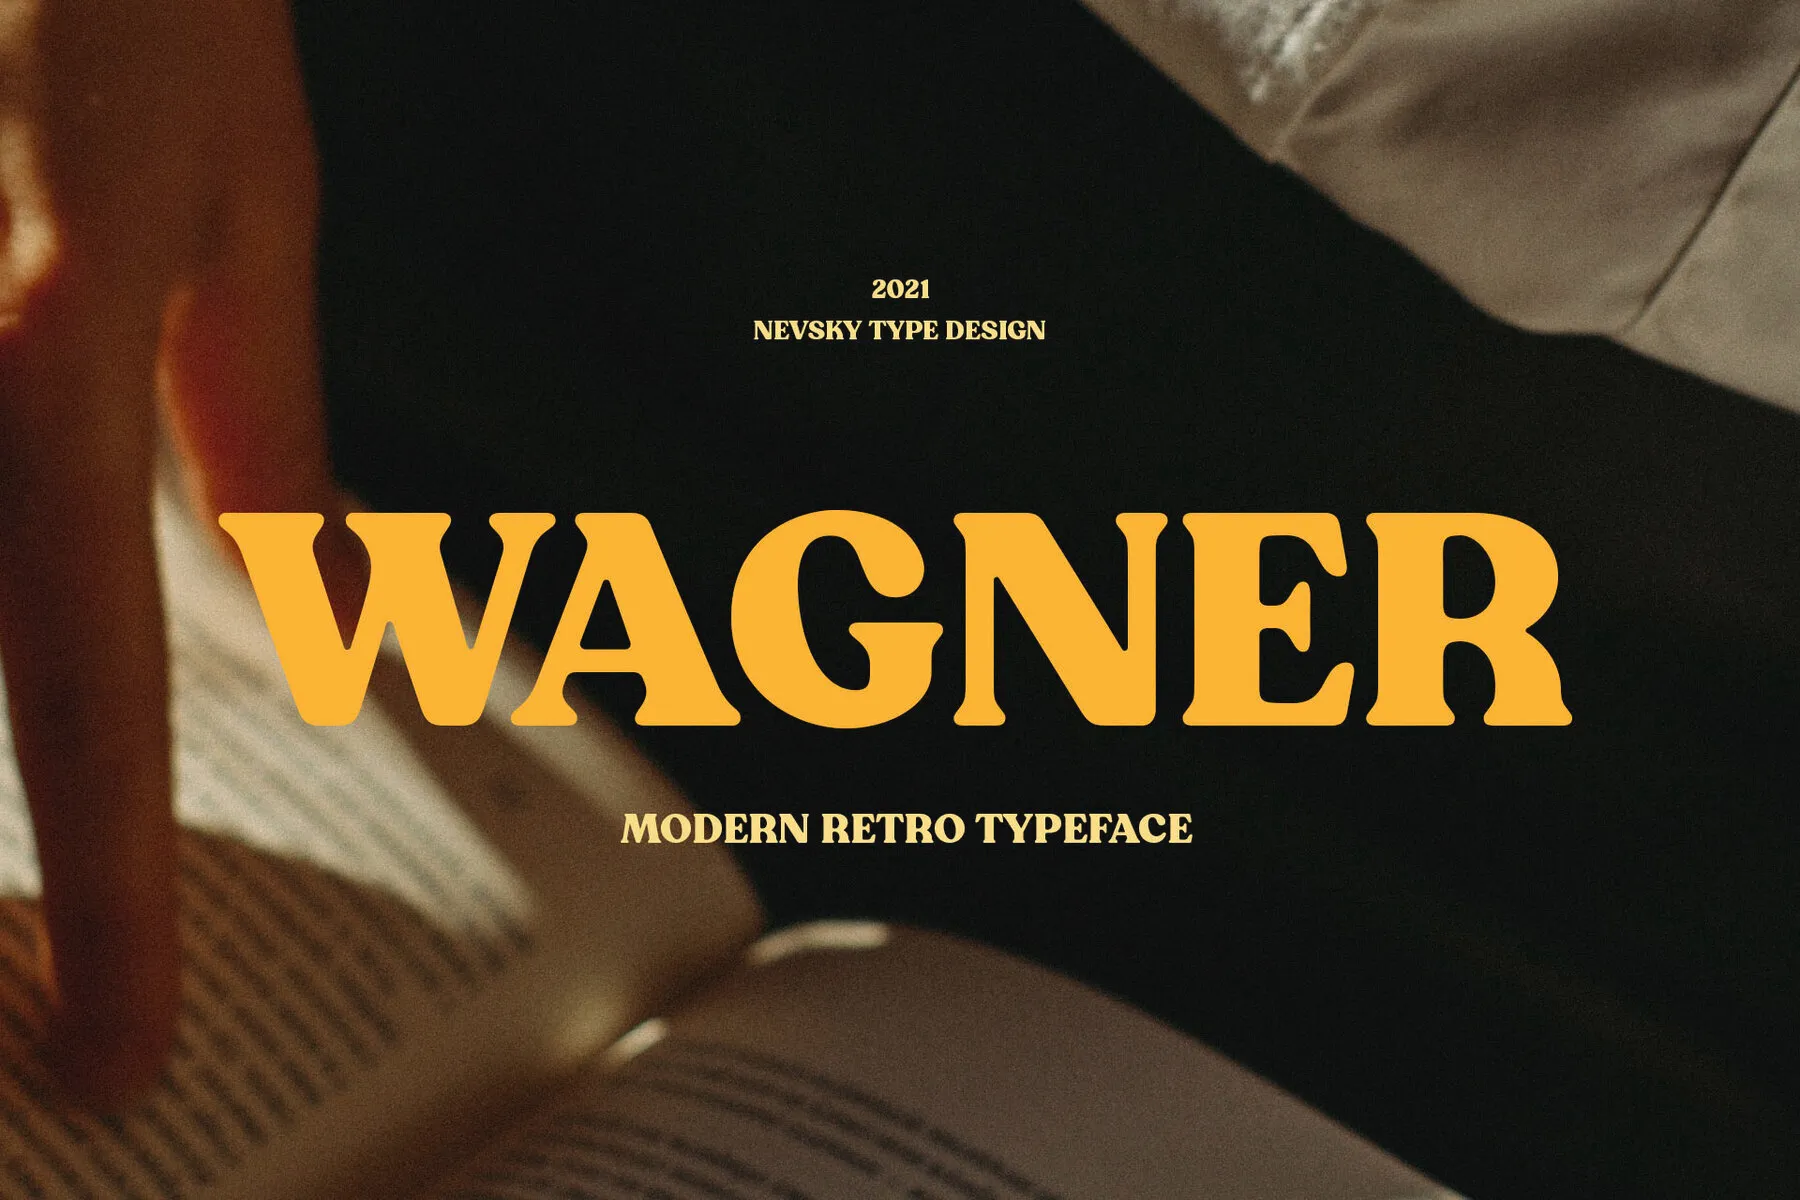 NT Wagner